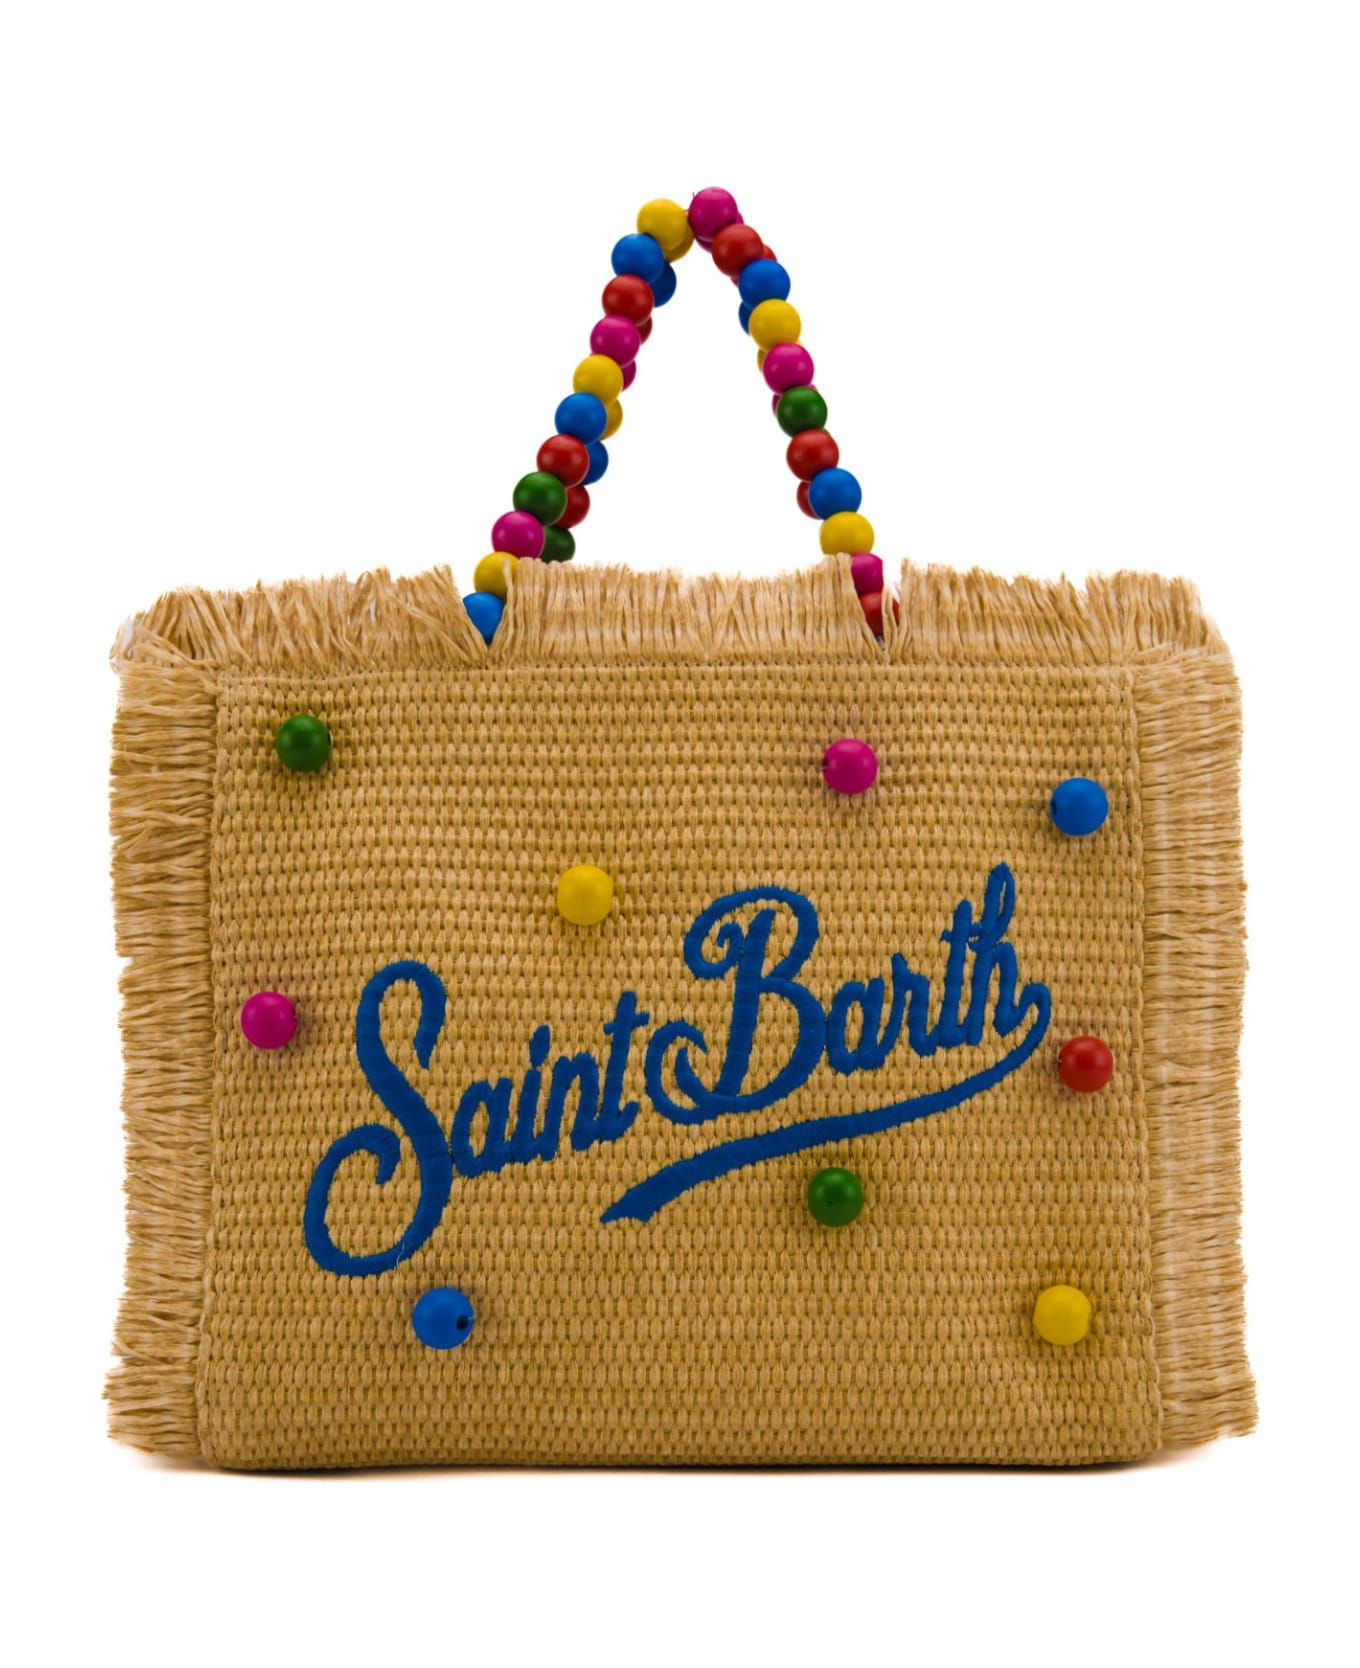 MC2 Saint Barth Colette Bag In Wood Beads Multicolor Straw - Naturale